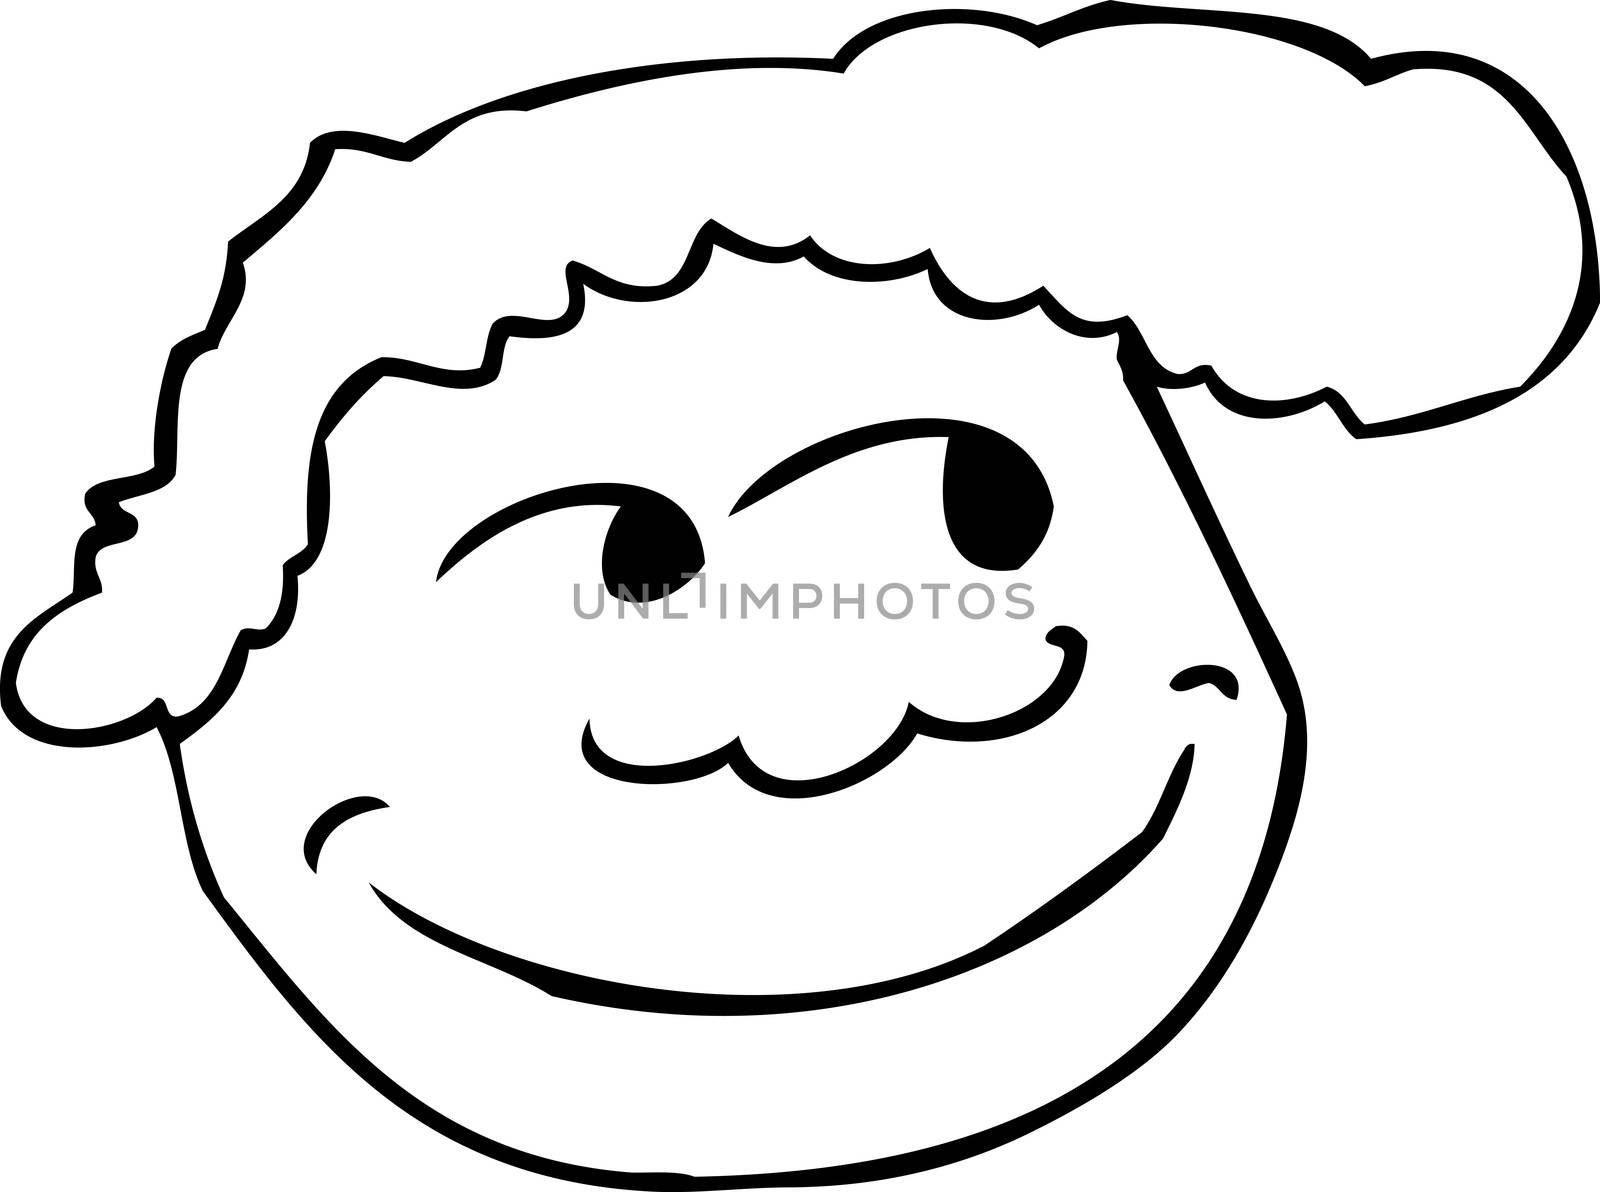 Outlined Grinning Face Icon by TheBlackRhino